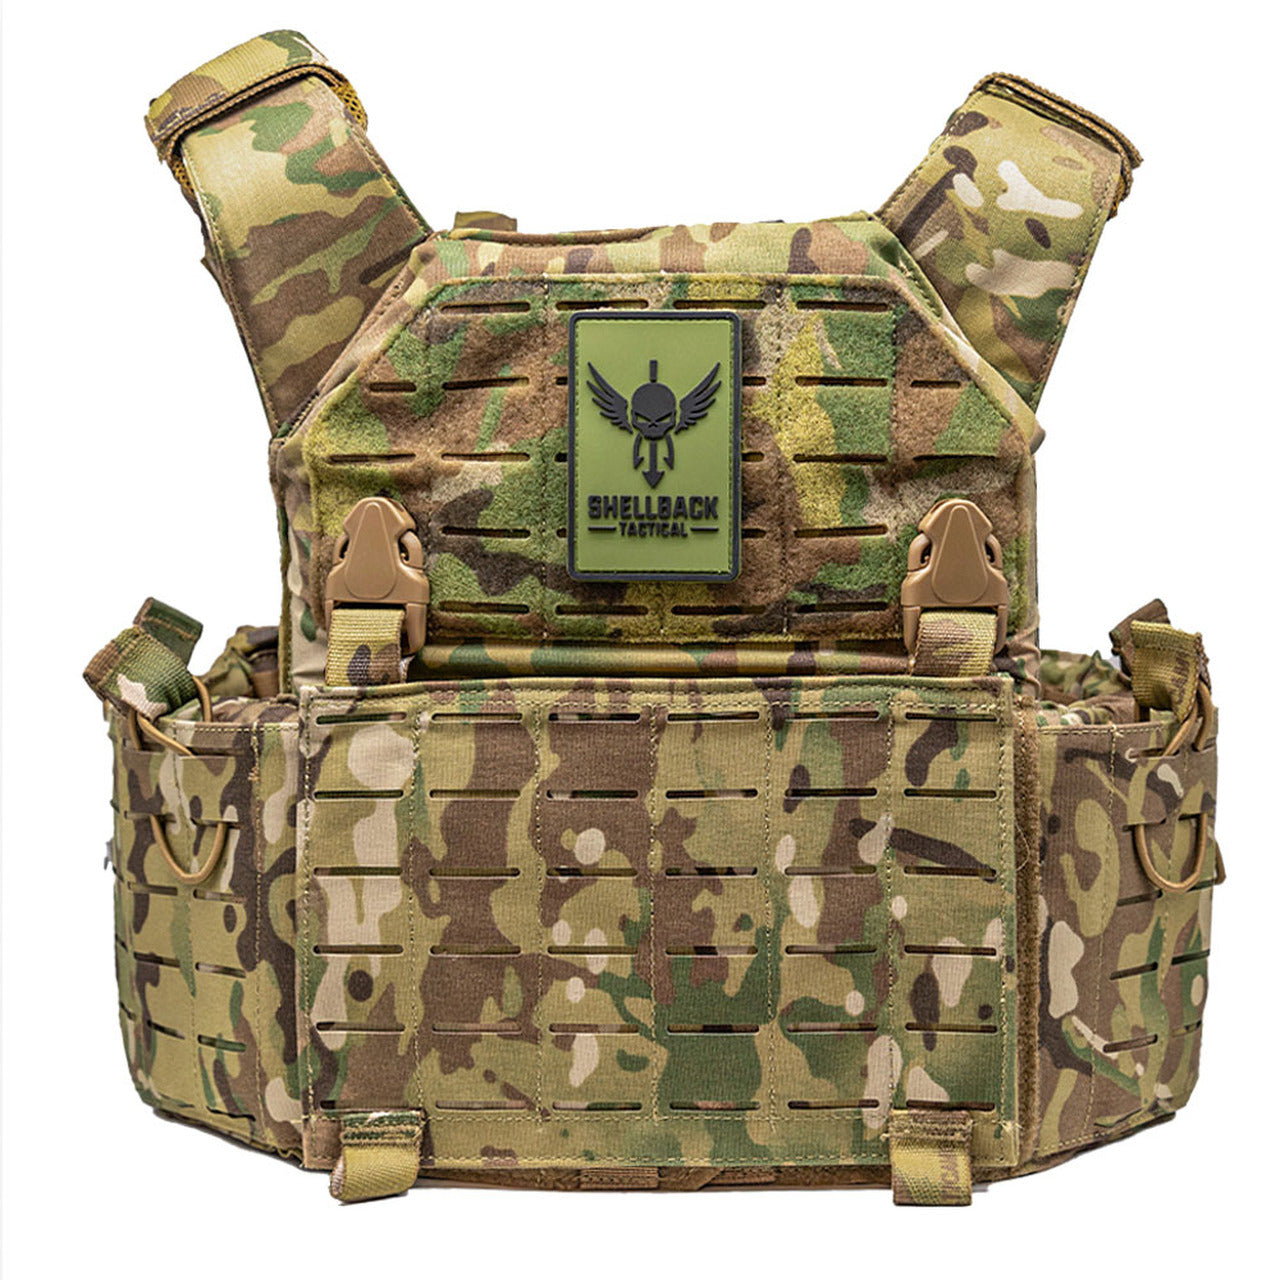 A Shellback Tactical Rampage 2.0 Plate Carrier with a camouflage pattern.